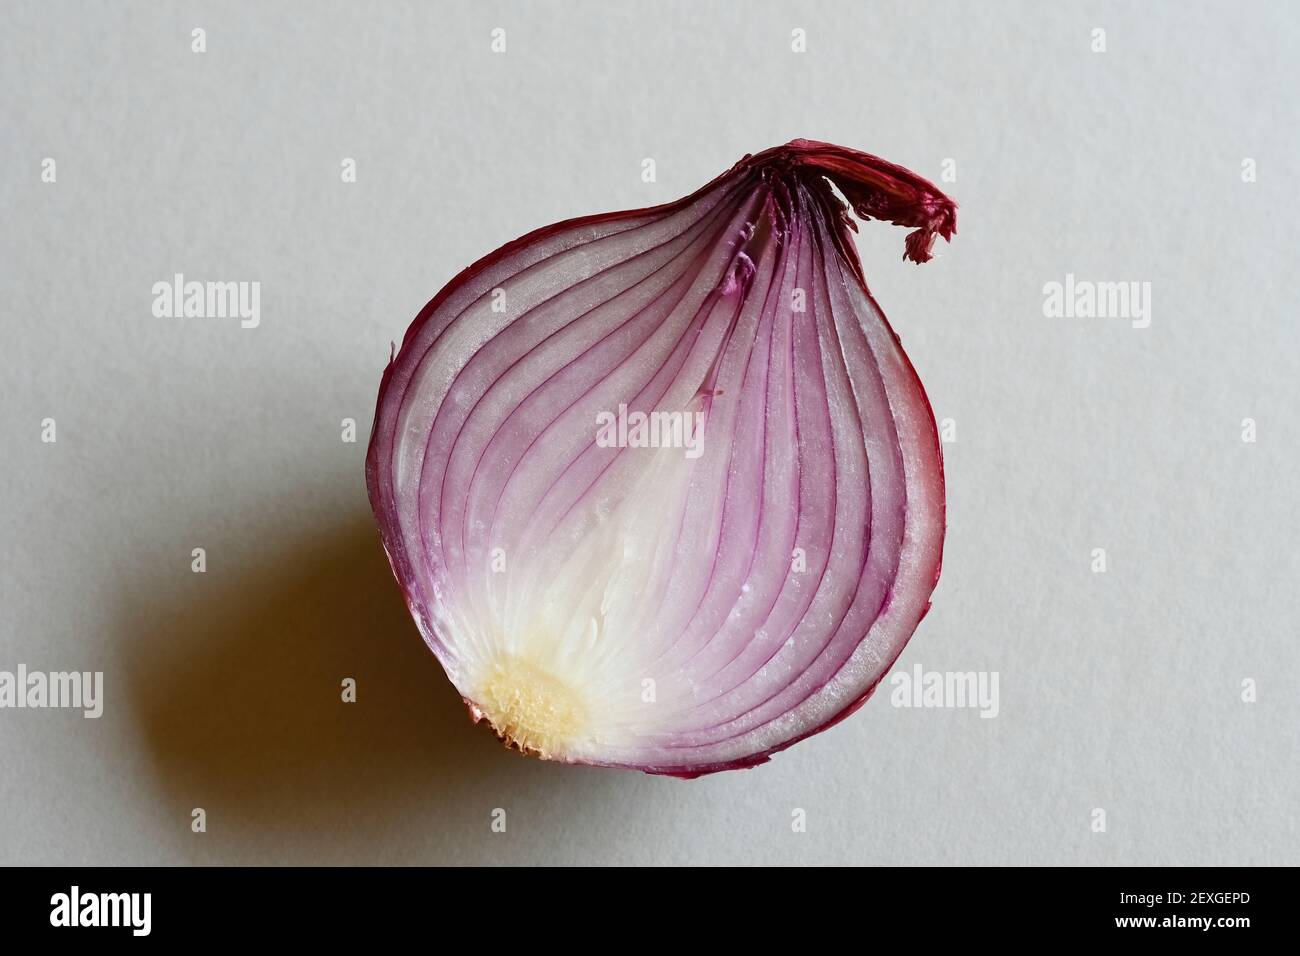 Red Onion cut in half at an angle on gray background Stock Photo